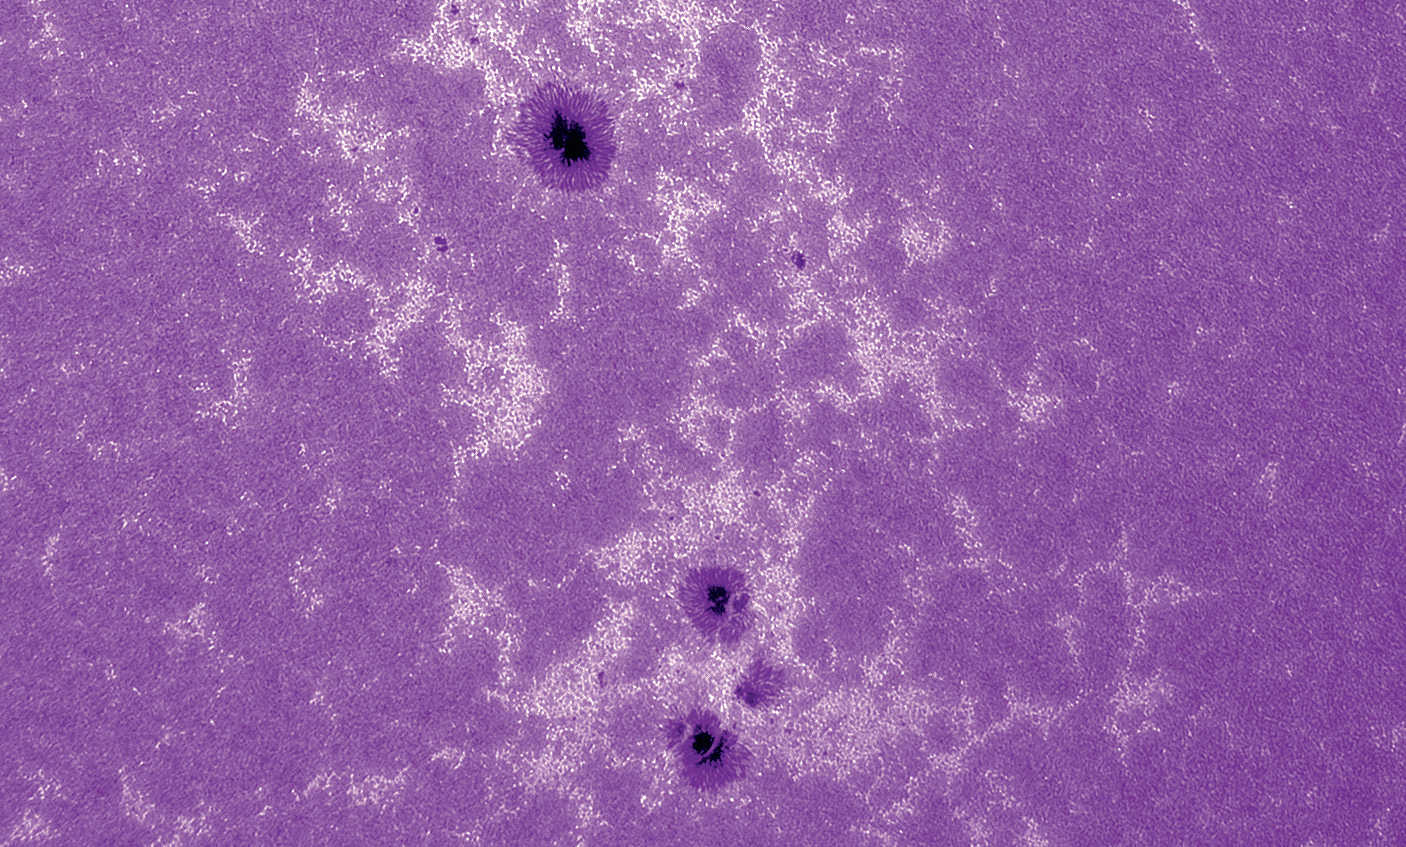 Calcium image of the Sun. Lunt Ca-K module (B600) on a refractor with a 2250mm focal length, aperture 130mm, uncooled CCD camera; 500 of 2500 frames processed in AviStack and Photoshop. U. Dittler